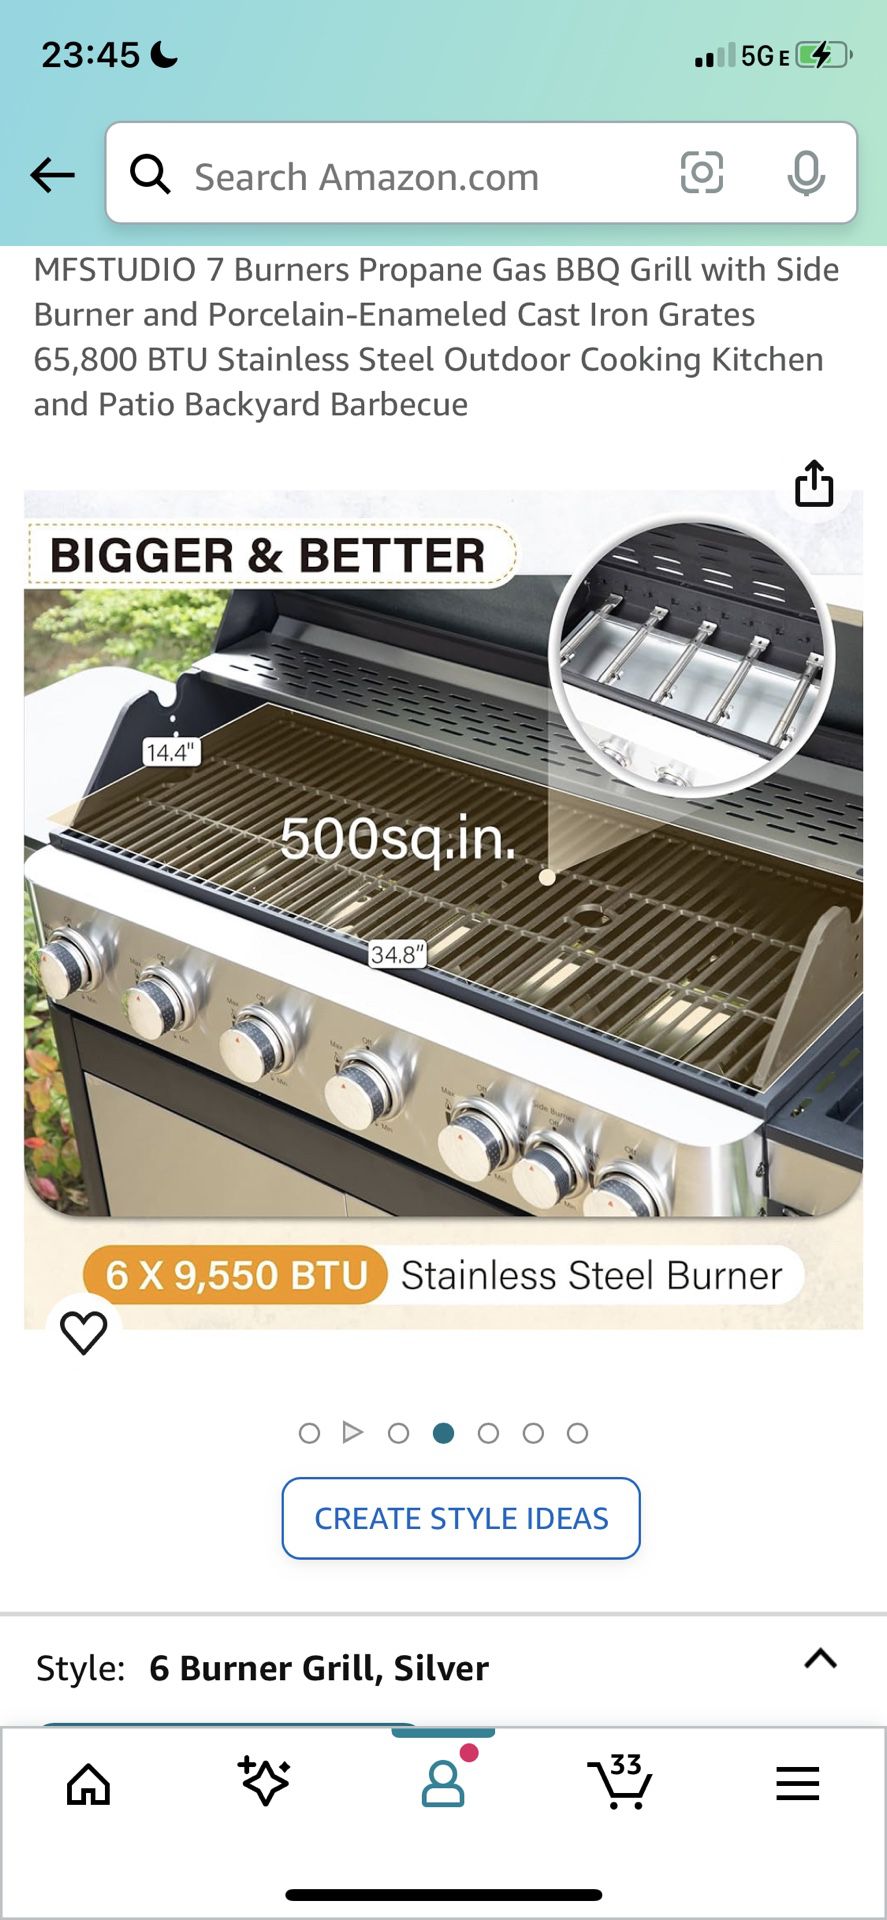 7 Burners Propane Gas BBQ Grill with Side Burner and Porcelain-Enameled Cast Iron Grates 65,800 BTU Stainless Steel Outdoor Cooking Kitchen and Patio 